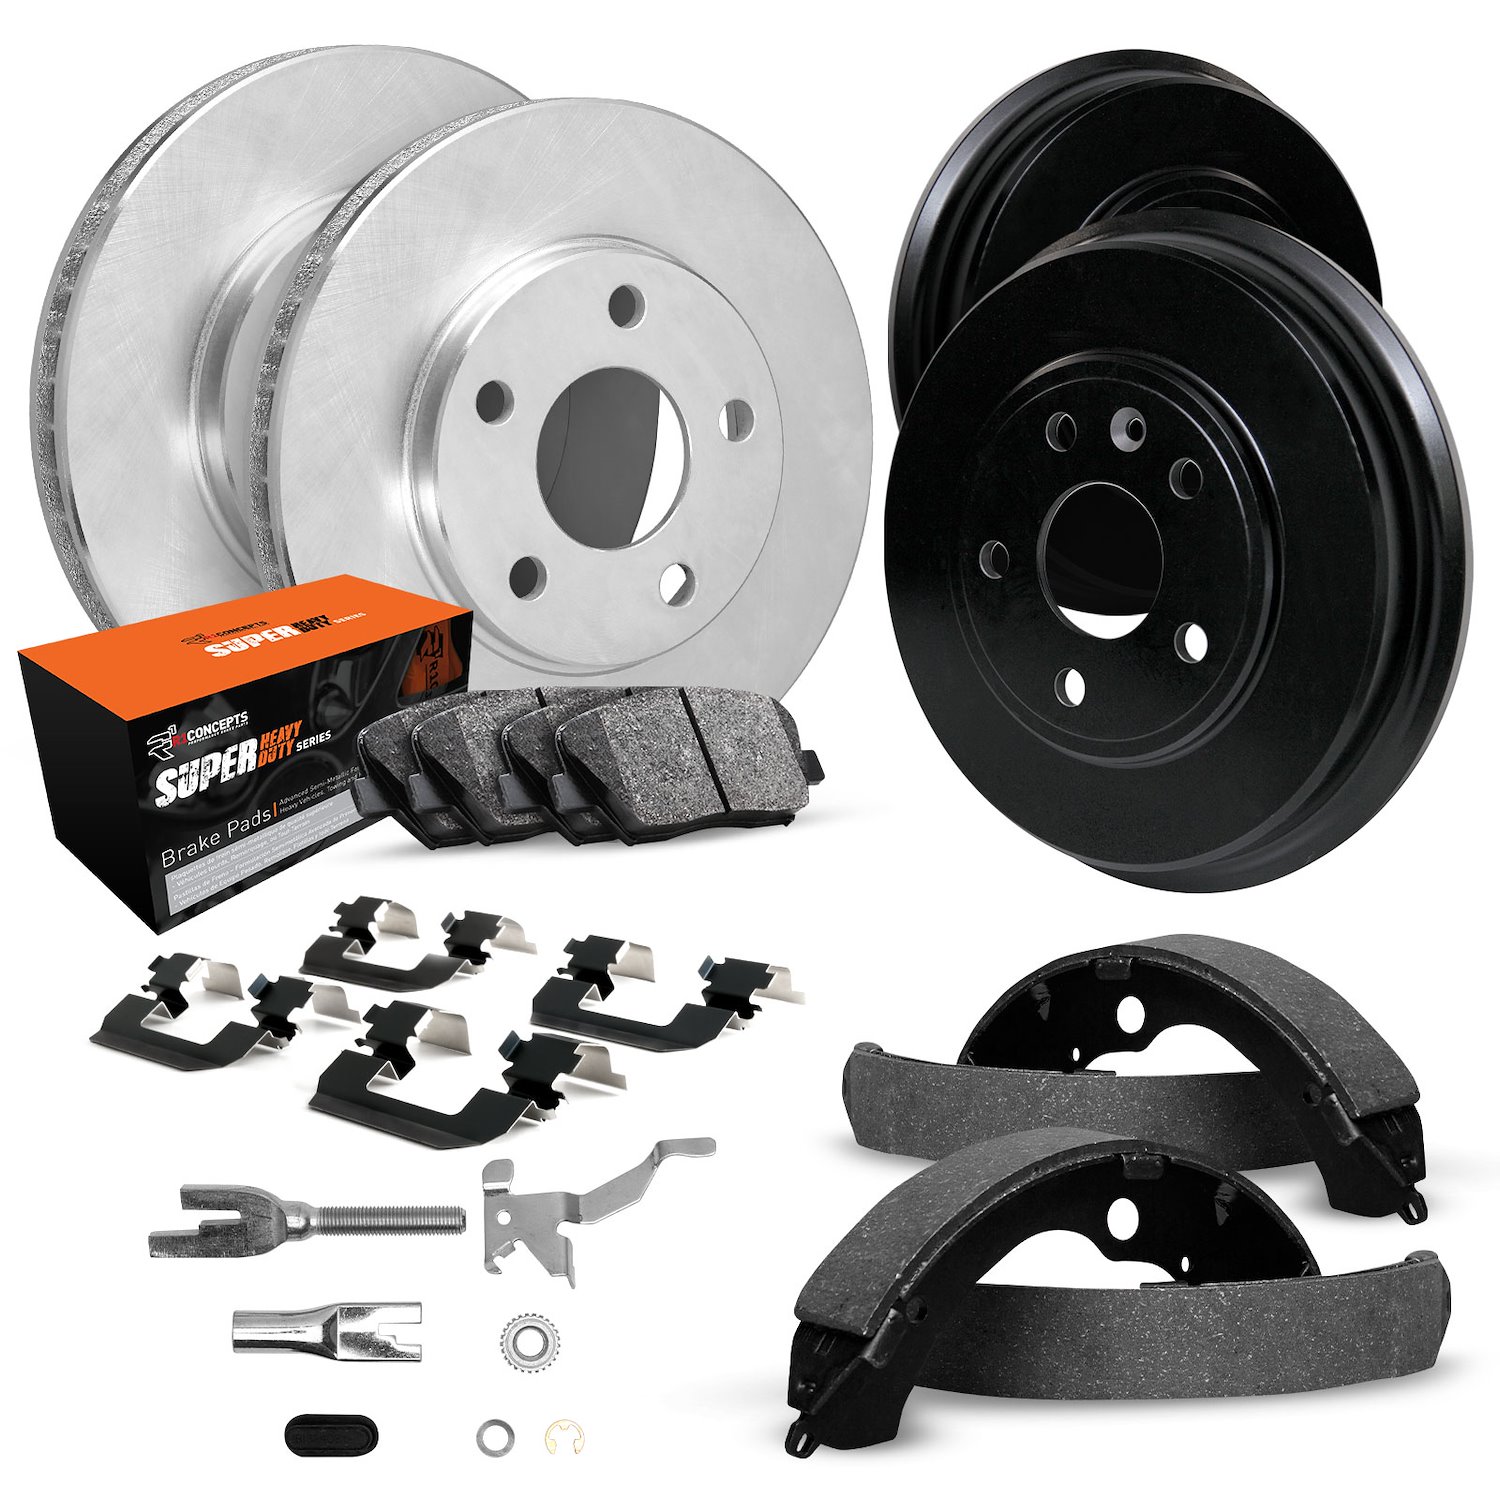 E-Line Blank Brake Rotor & Drum Set w/Super-Duty Pads, Shoes, Hardware, & Adjusters, 1980-1985 Ford/Lincoln/Mercury/Mazda